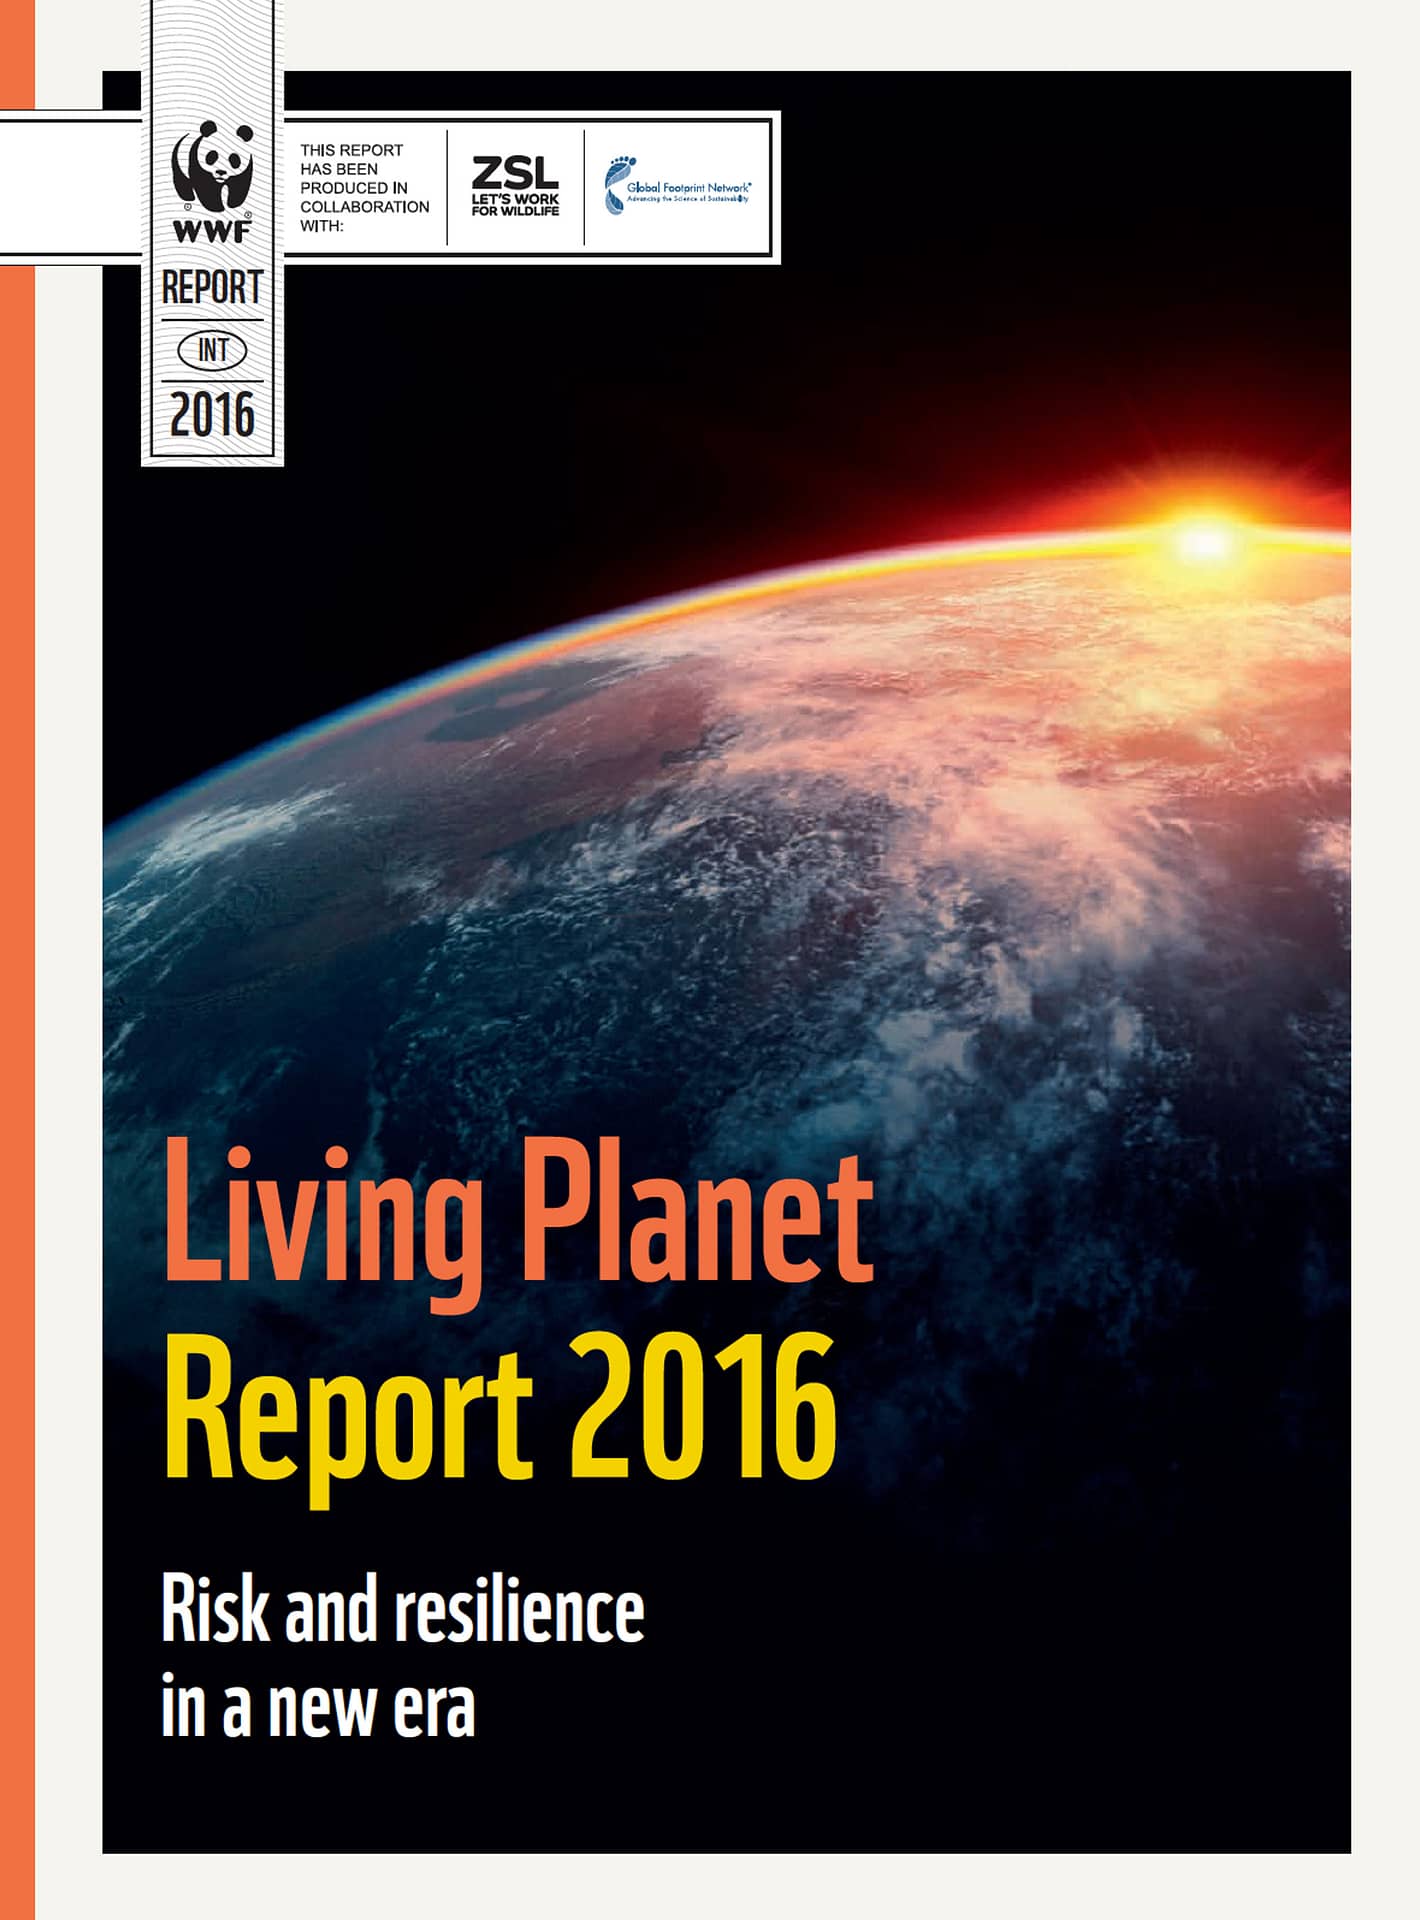 WWF’s biennial Living  Planet Report is the most influential and important science-based analysis on the health of the planet and the impact of human activity.